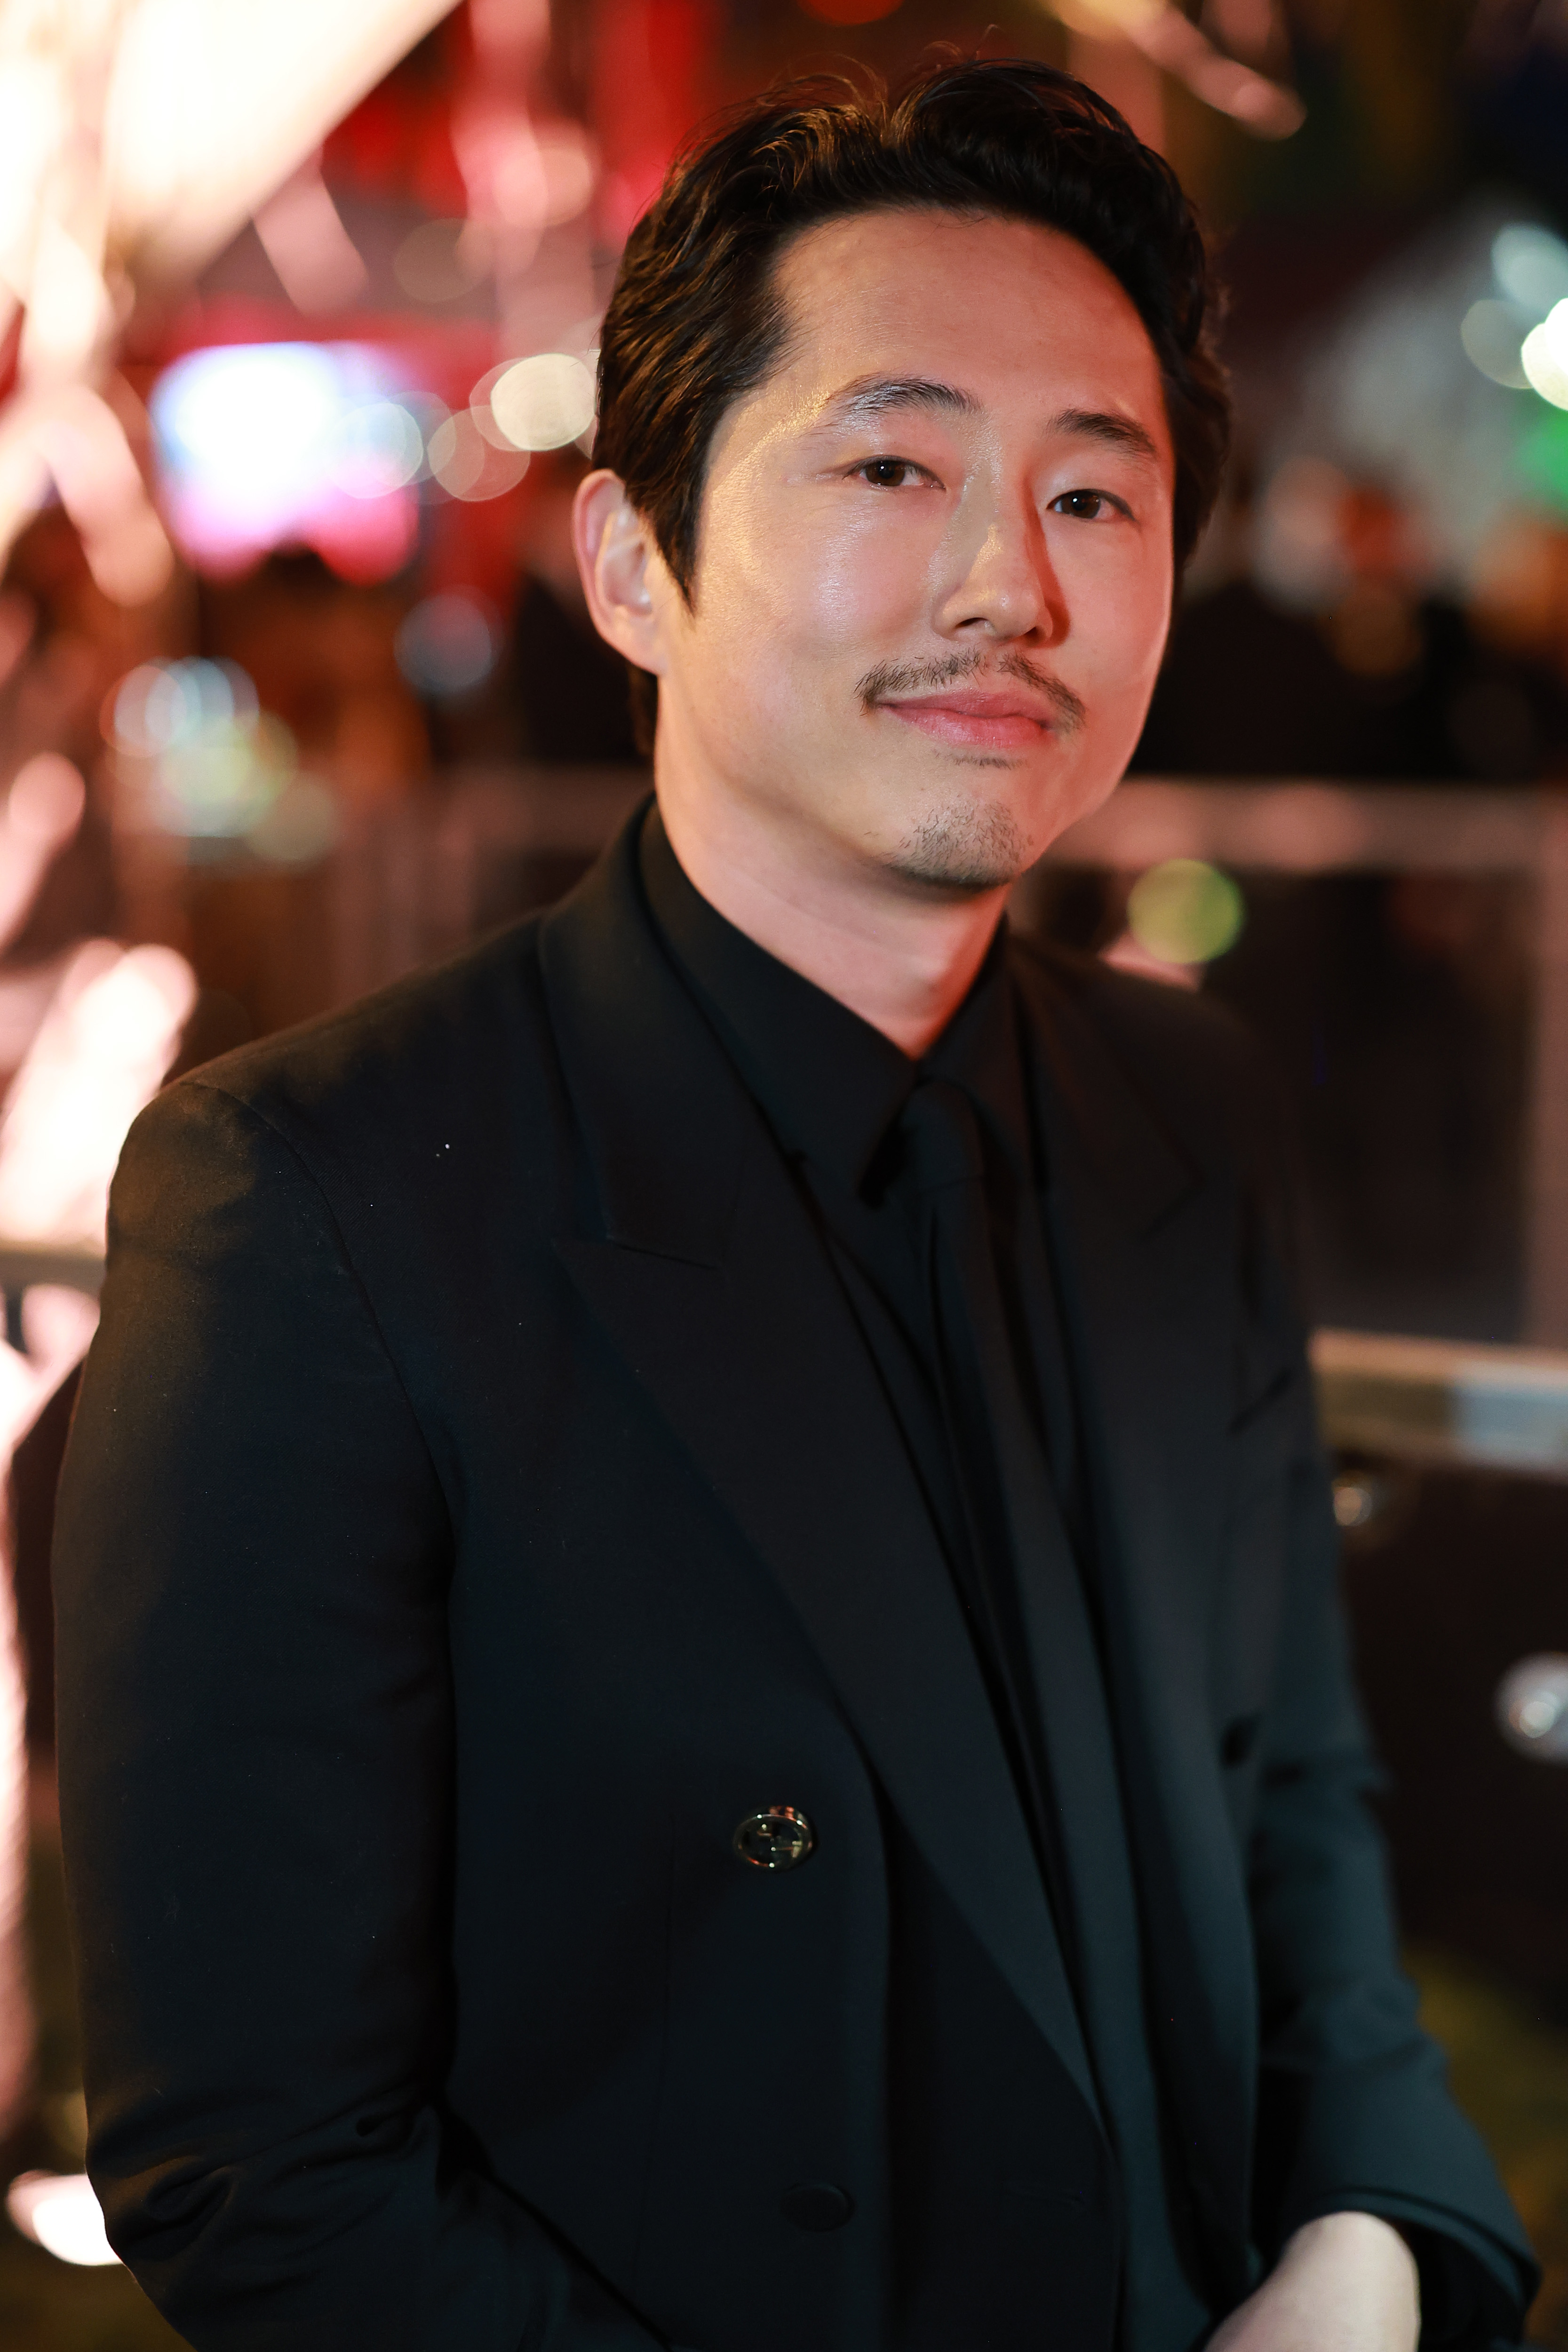 Steven Yeun in a formal black suit smiling at a celebrity event